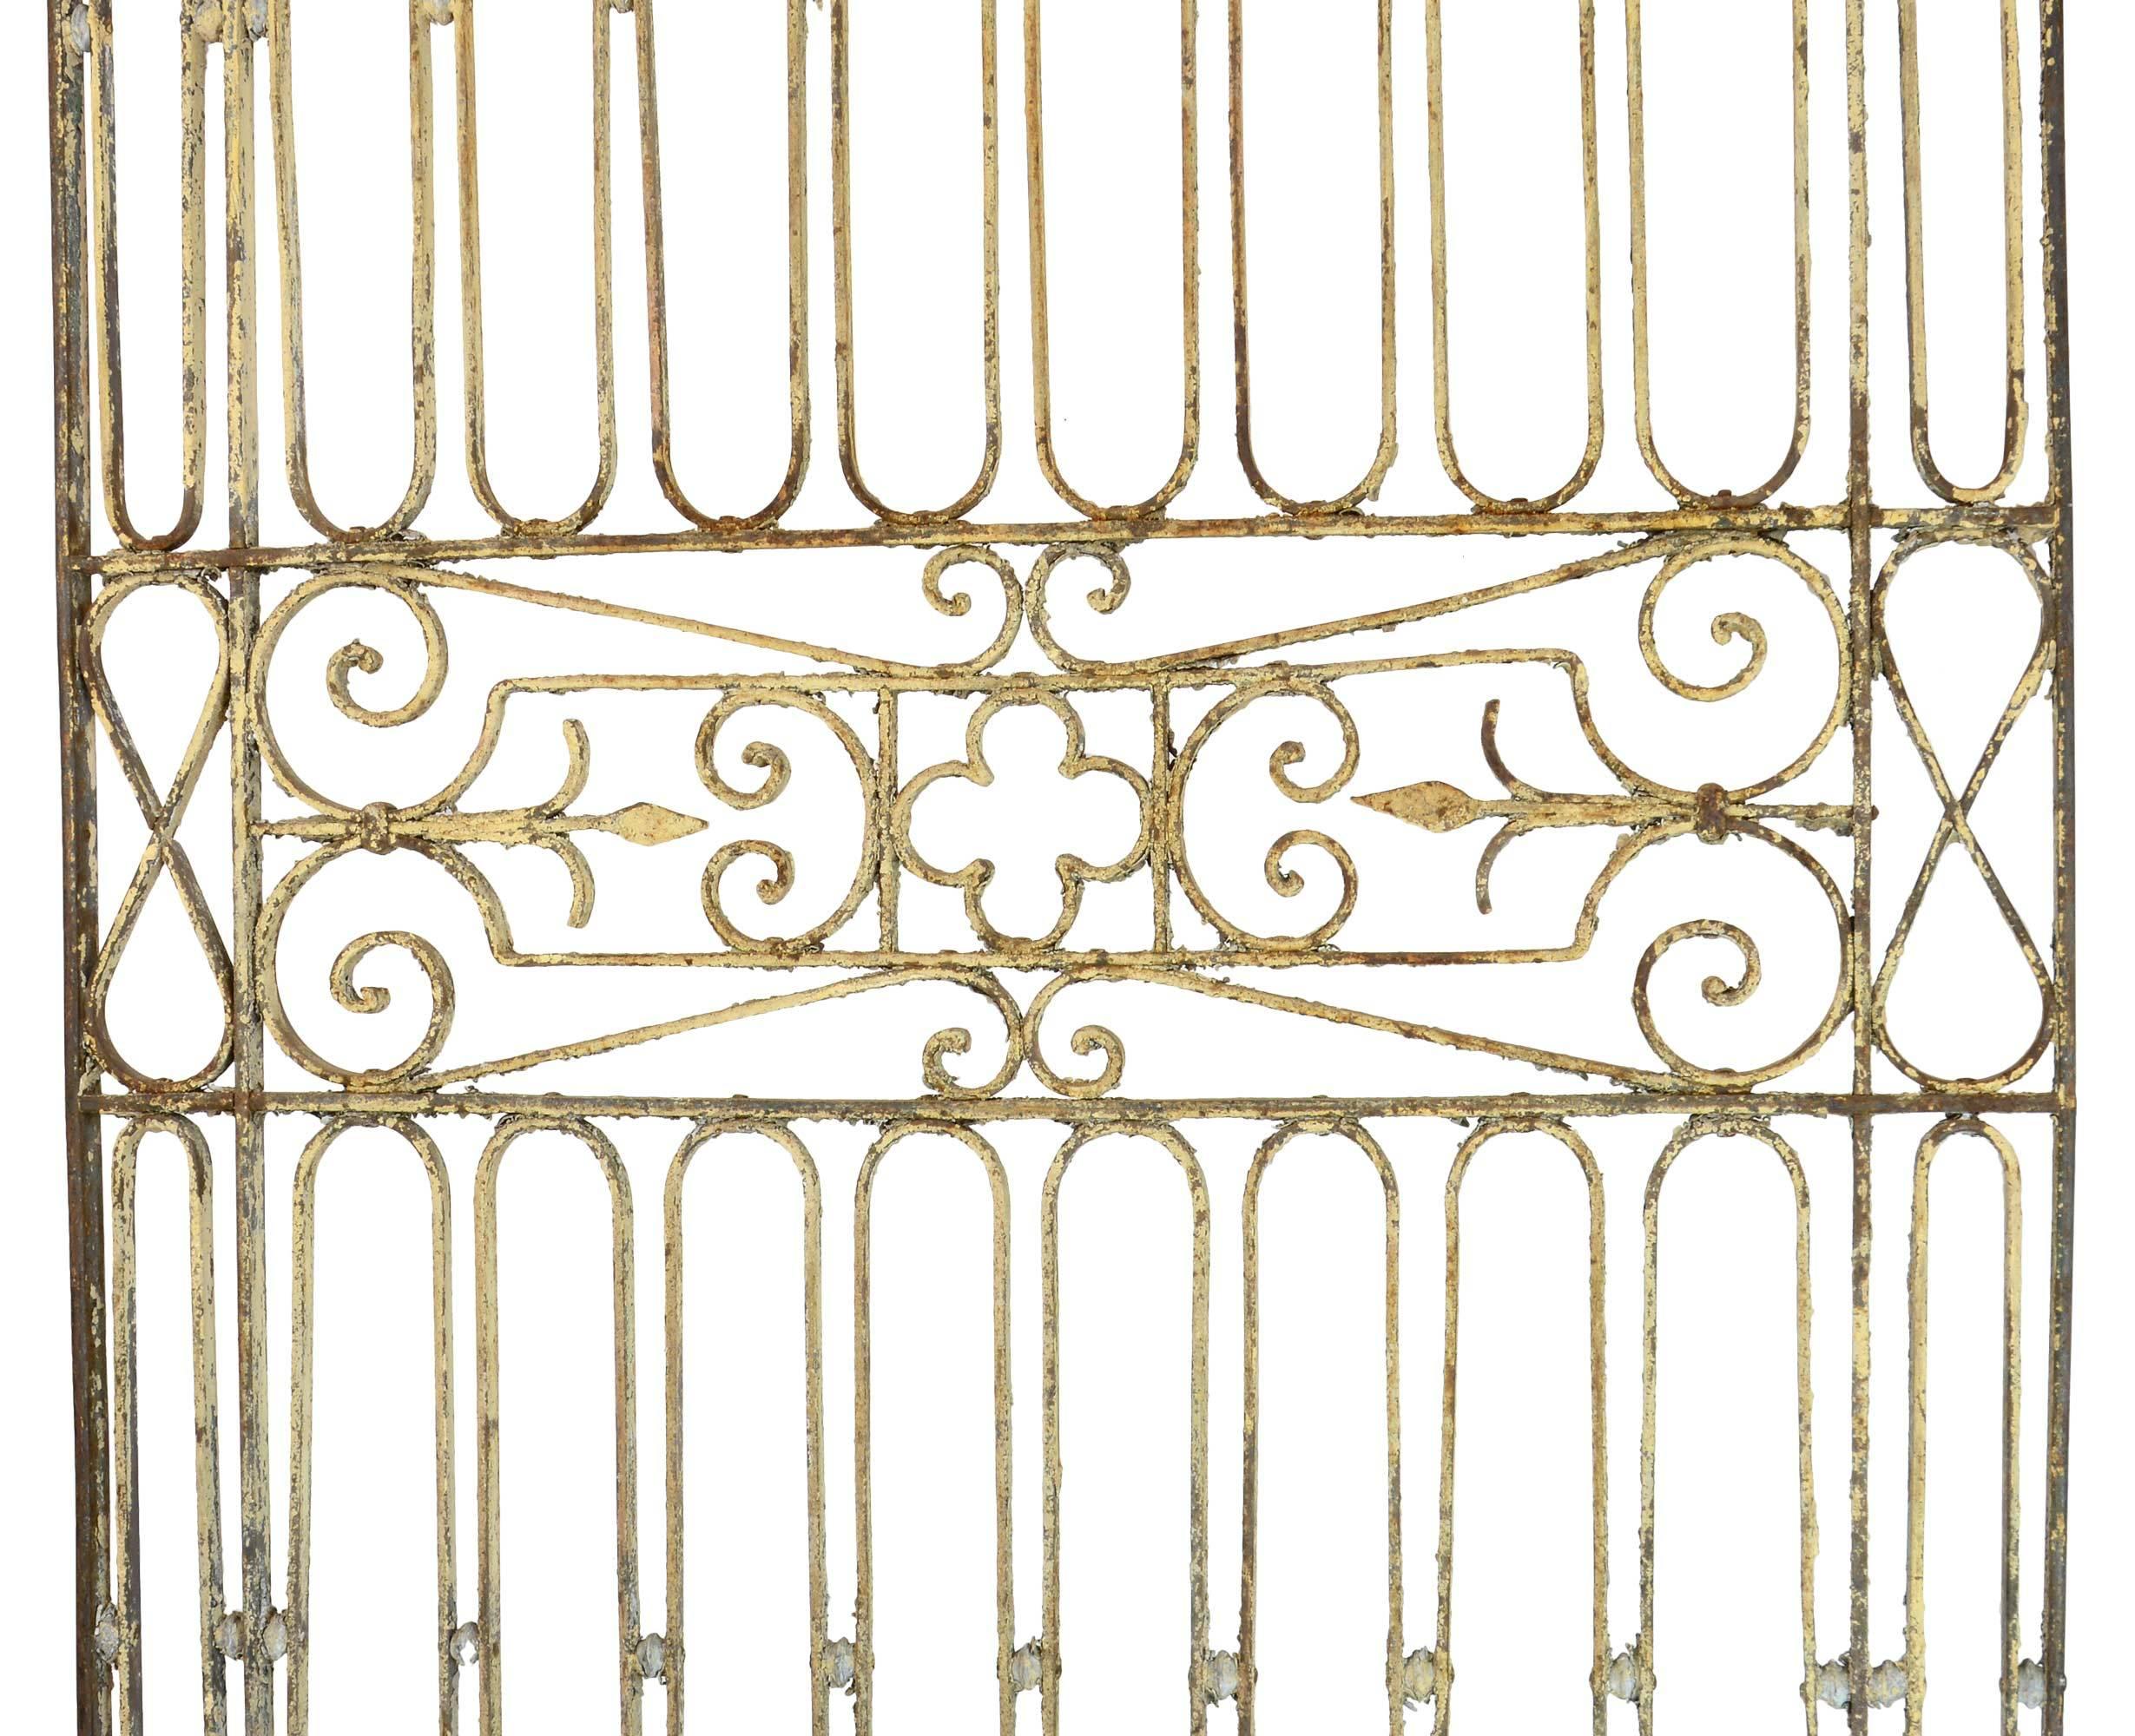 Gothic Revival Large Early 20th Century Decorative Iron Panel, circa 1905